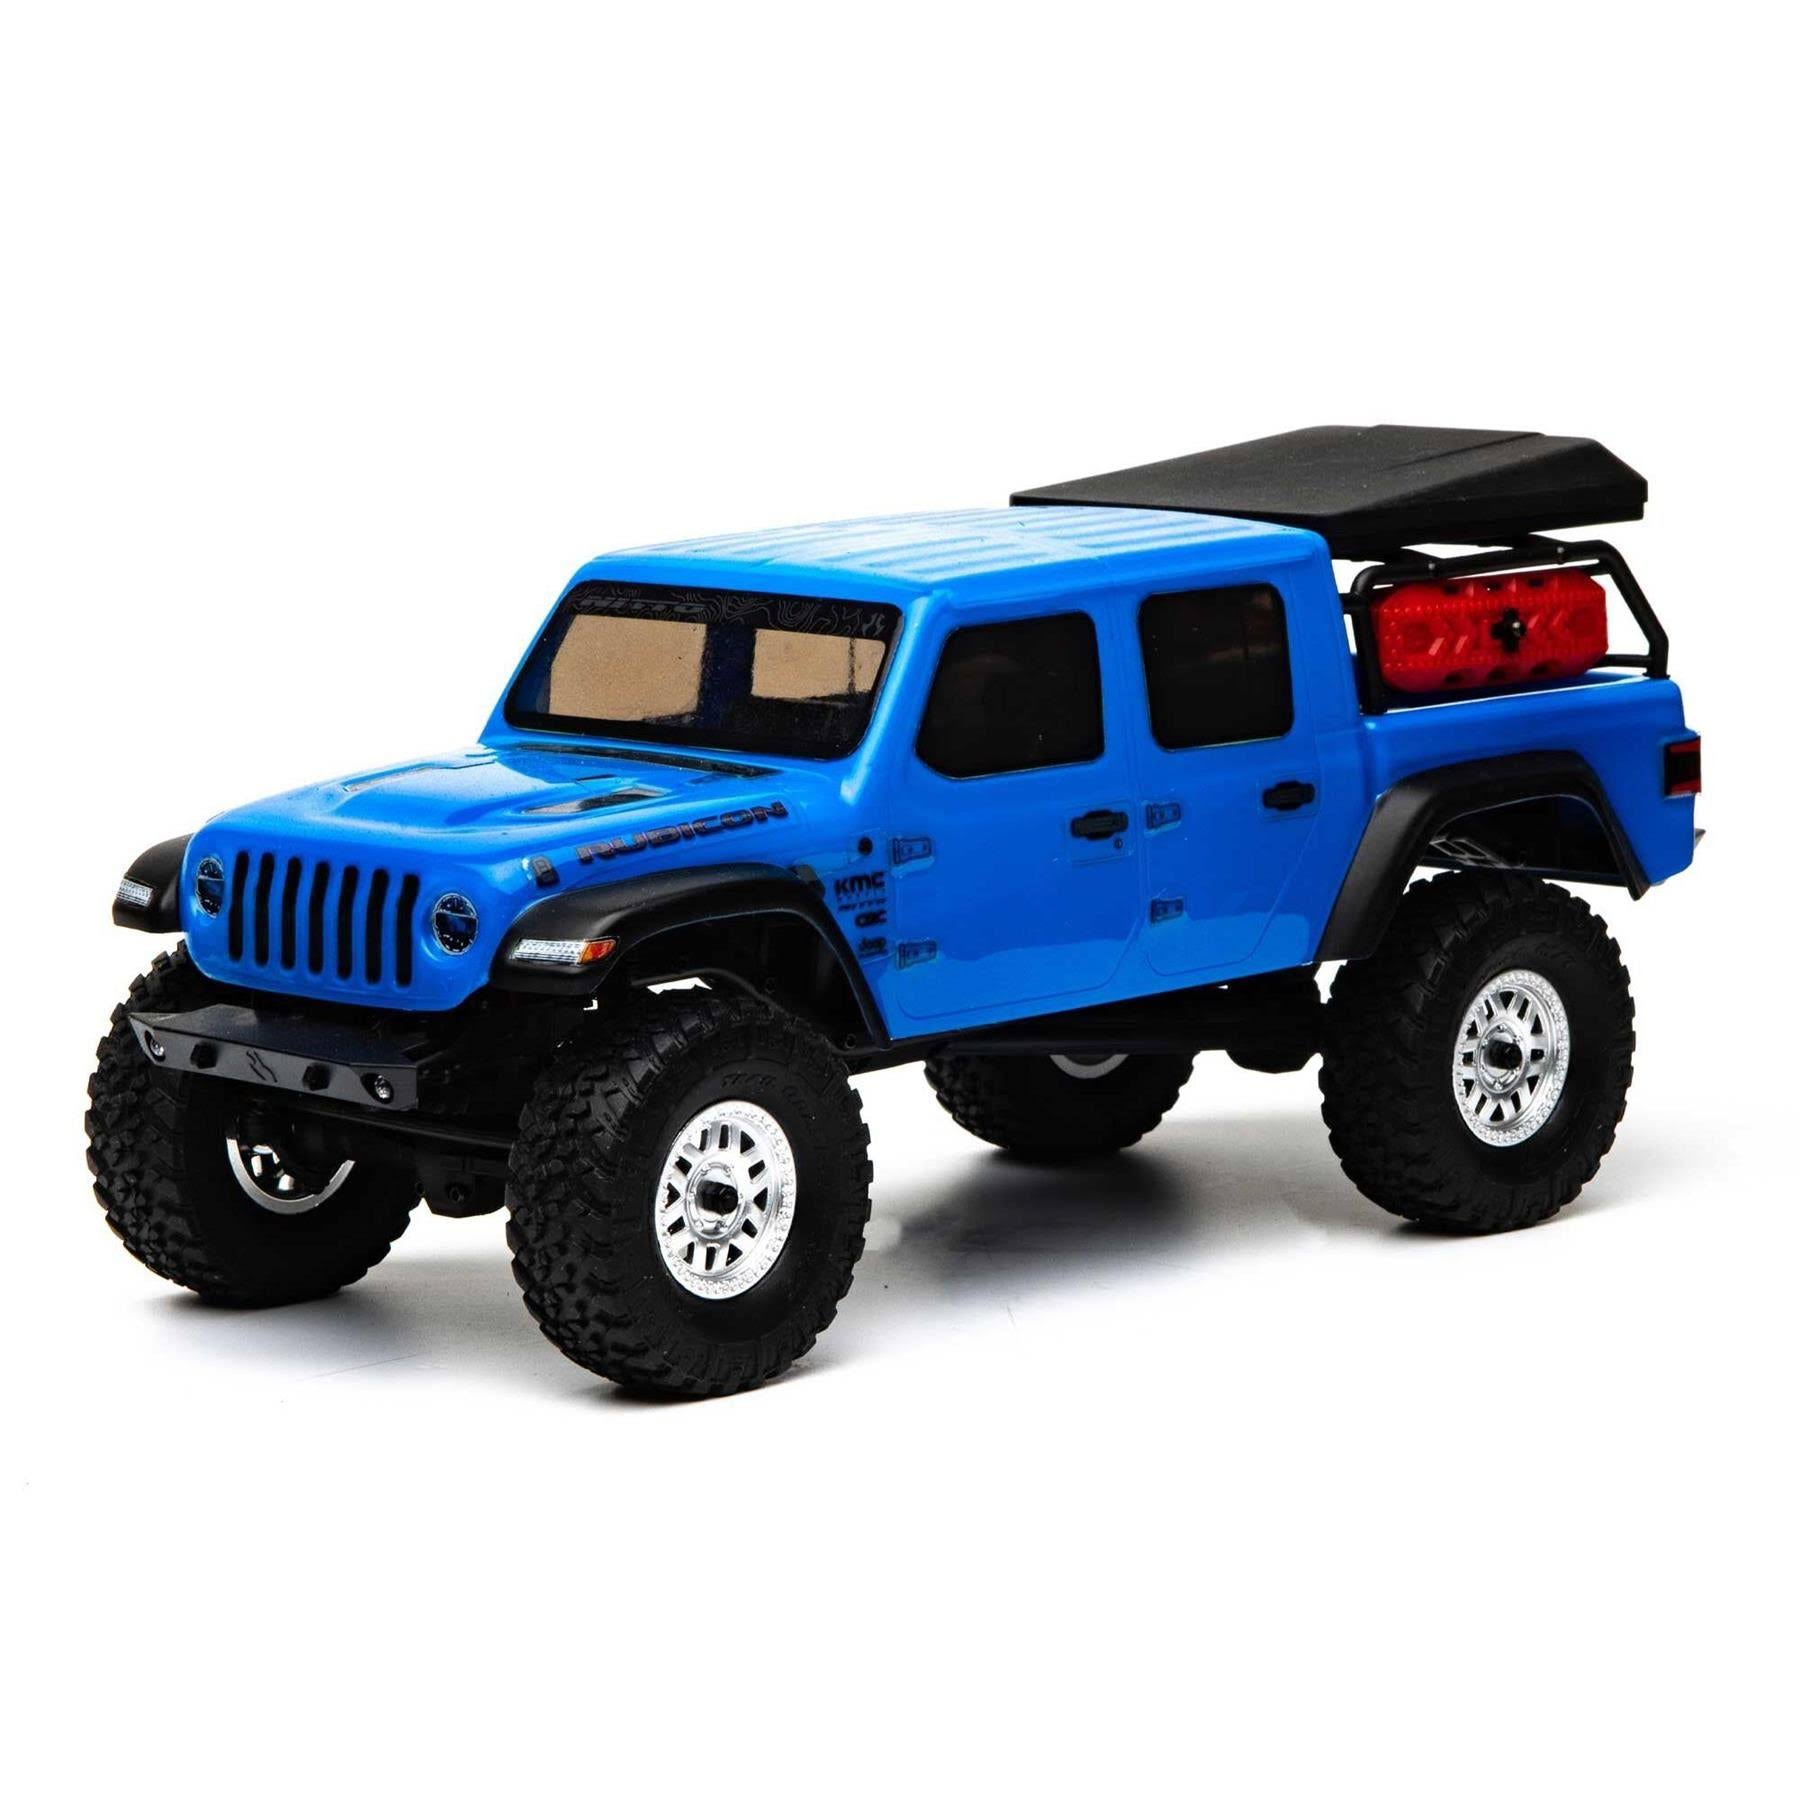 AXIAL RACING AXI 00005T2 SCX24 Jeep Gladiator, 1/24th 4WD RTR, Blue